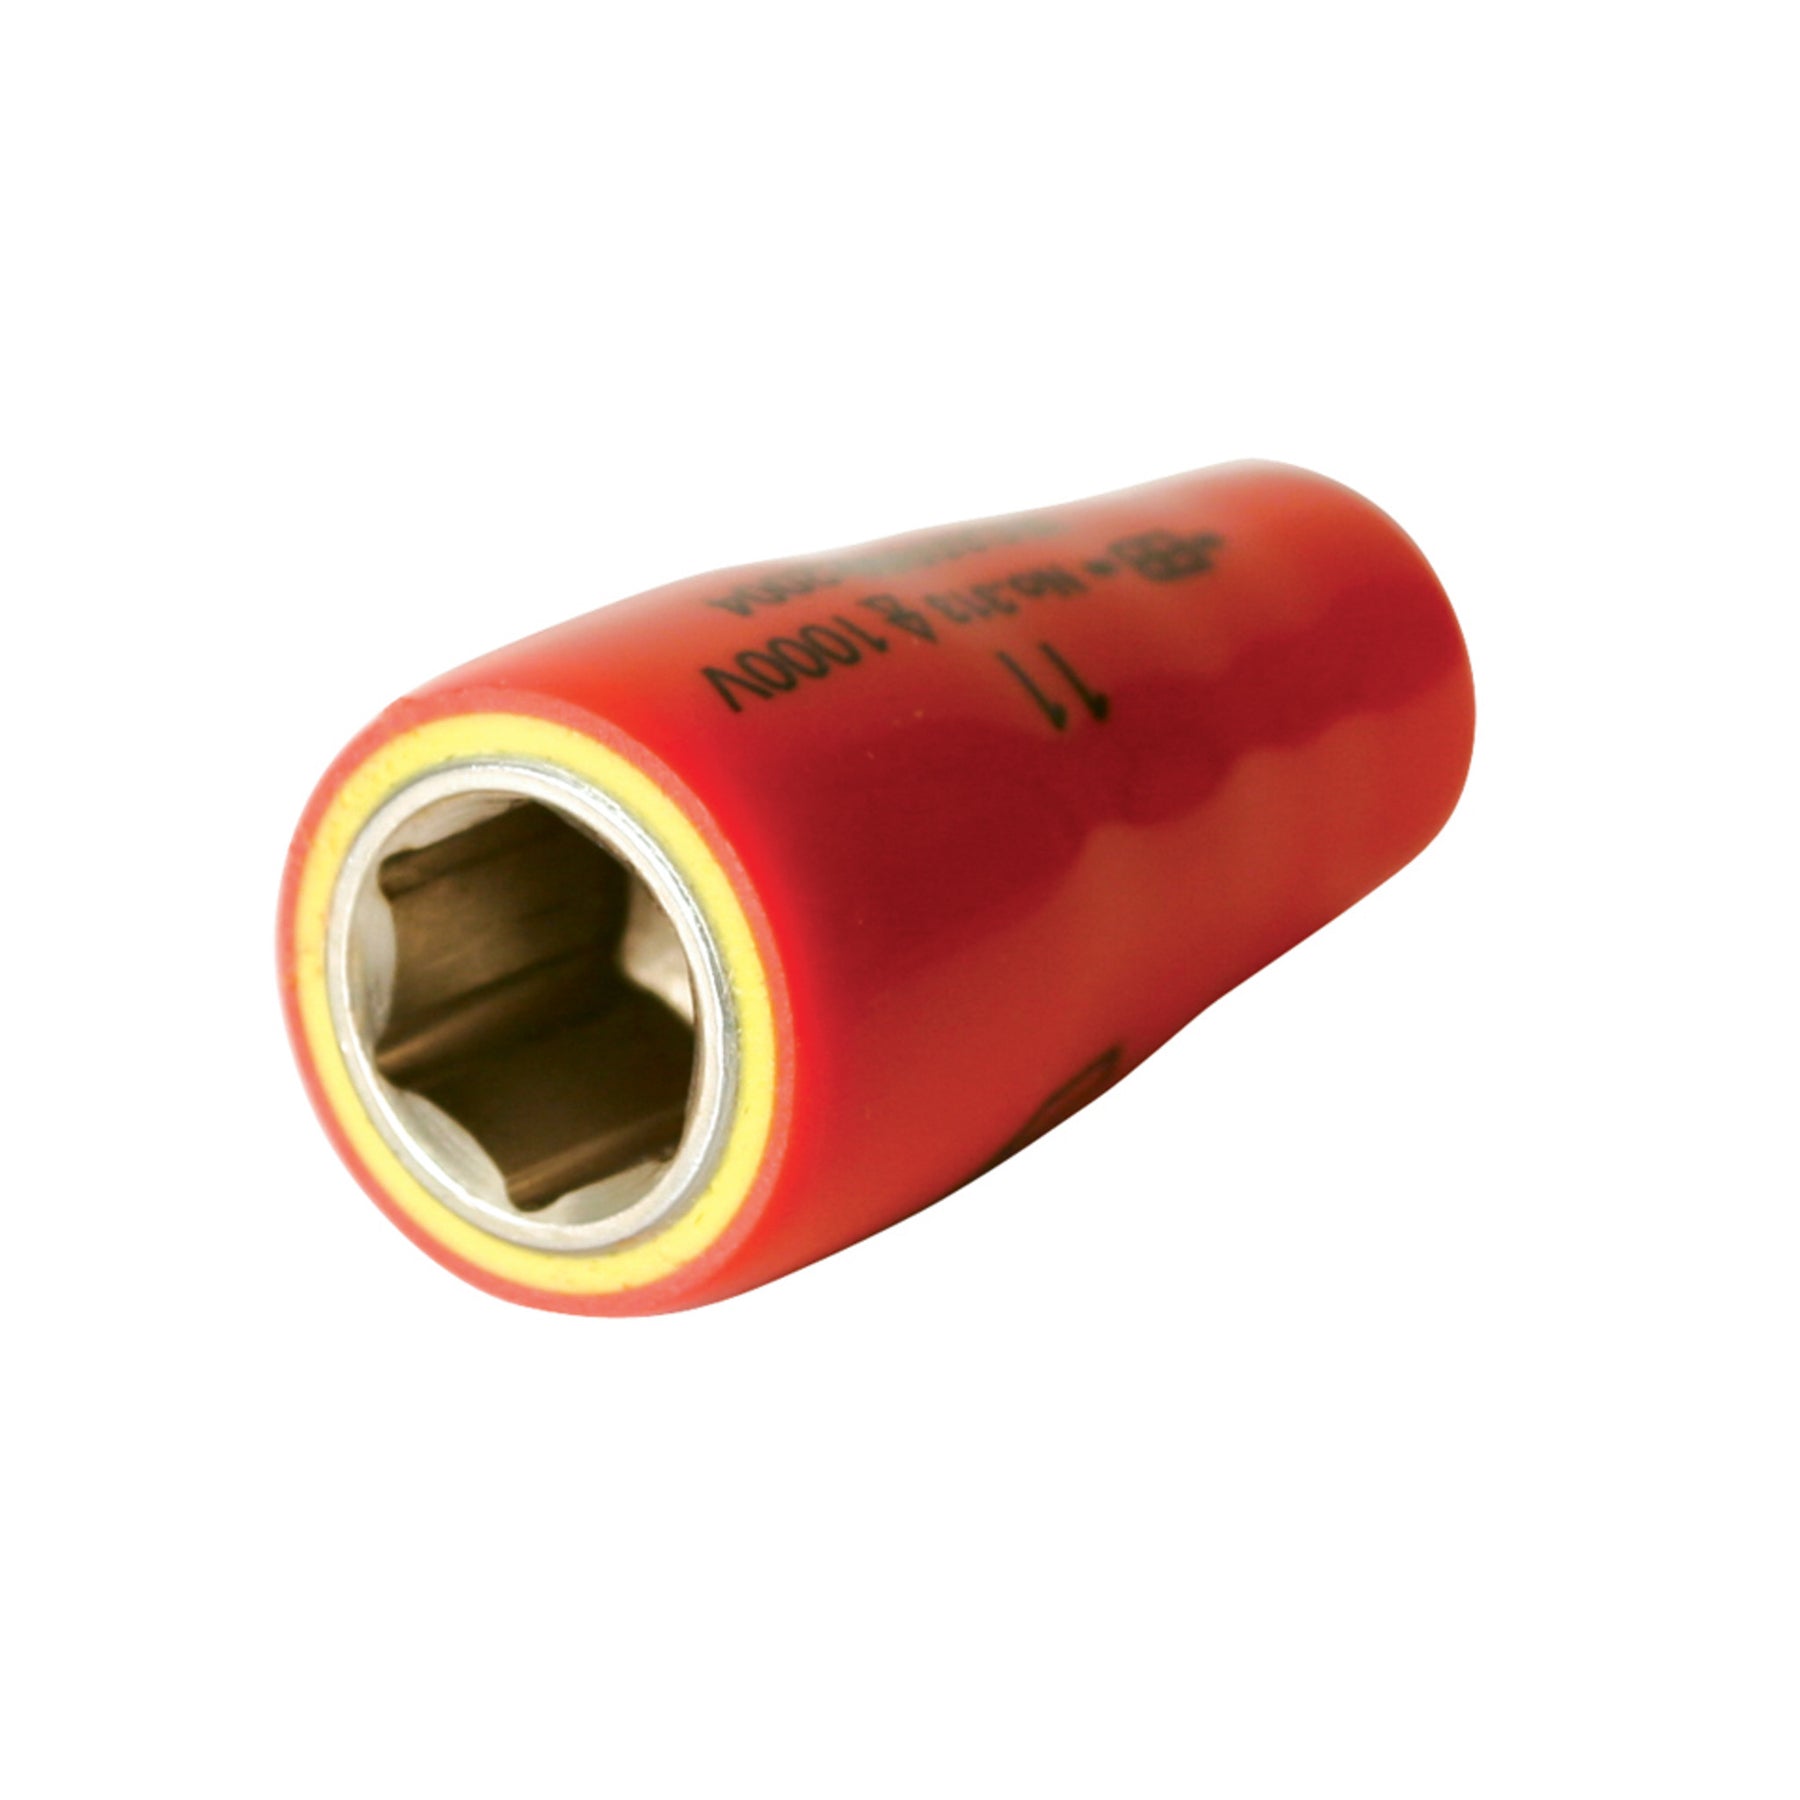 Insulated Socket 1/4" Drive 7mm